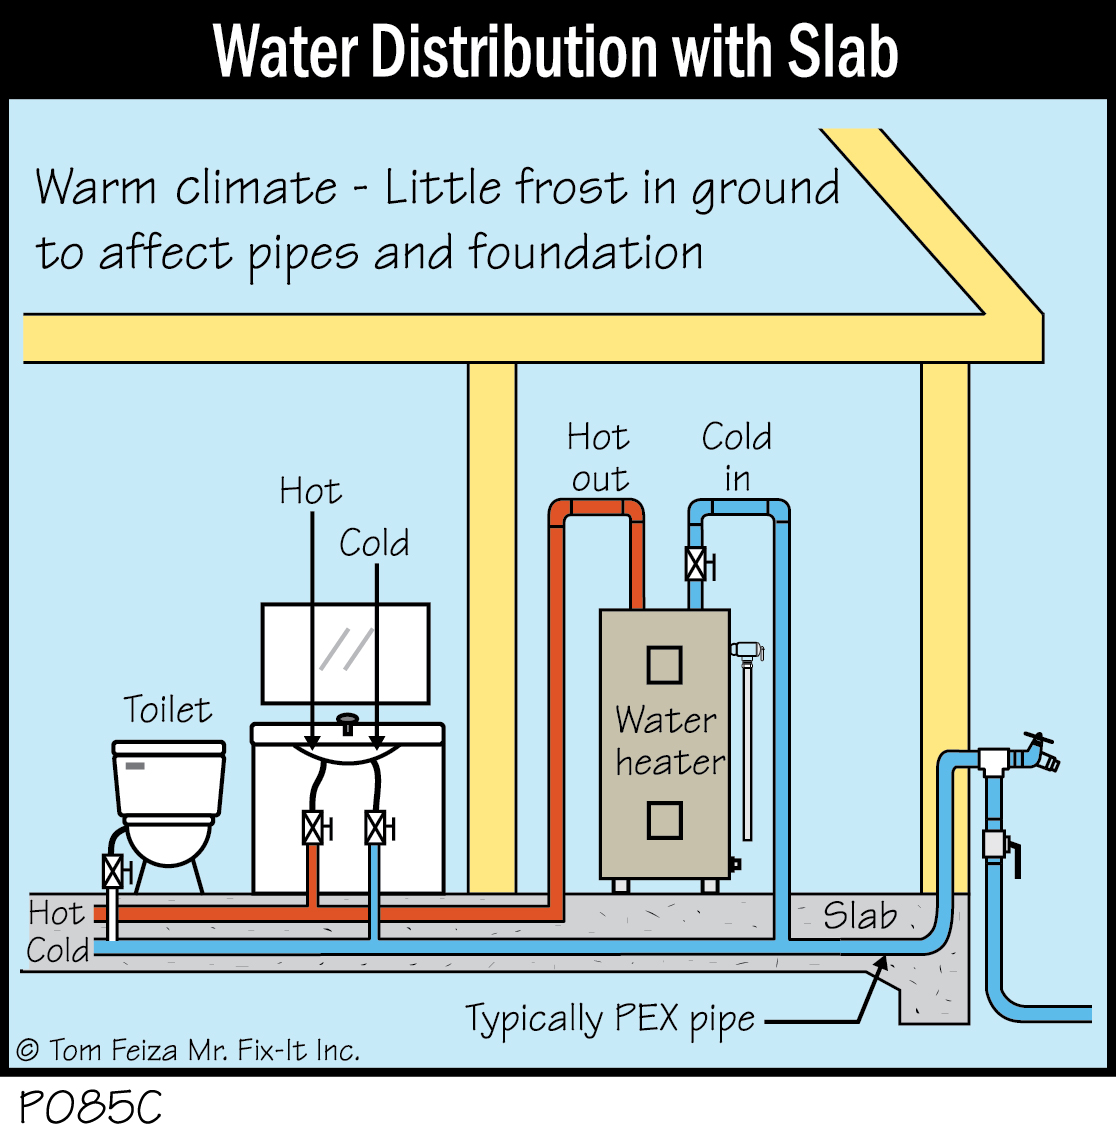 P085C - Water Distribution with Slab